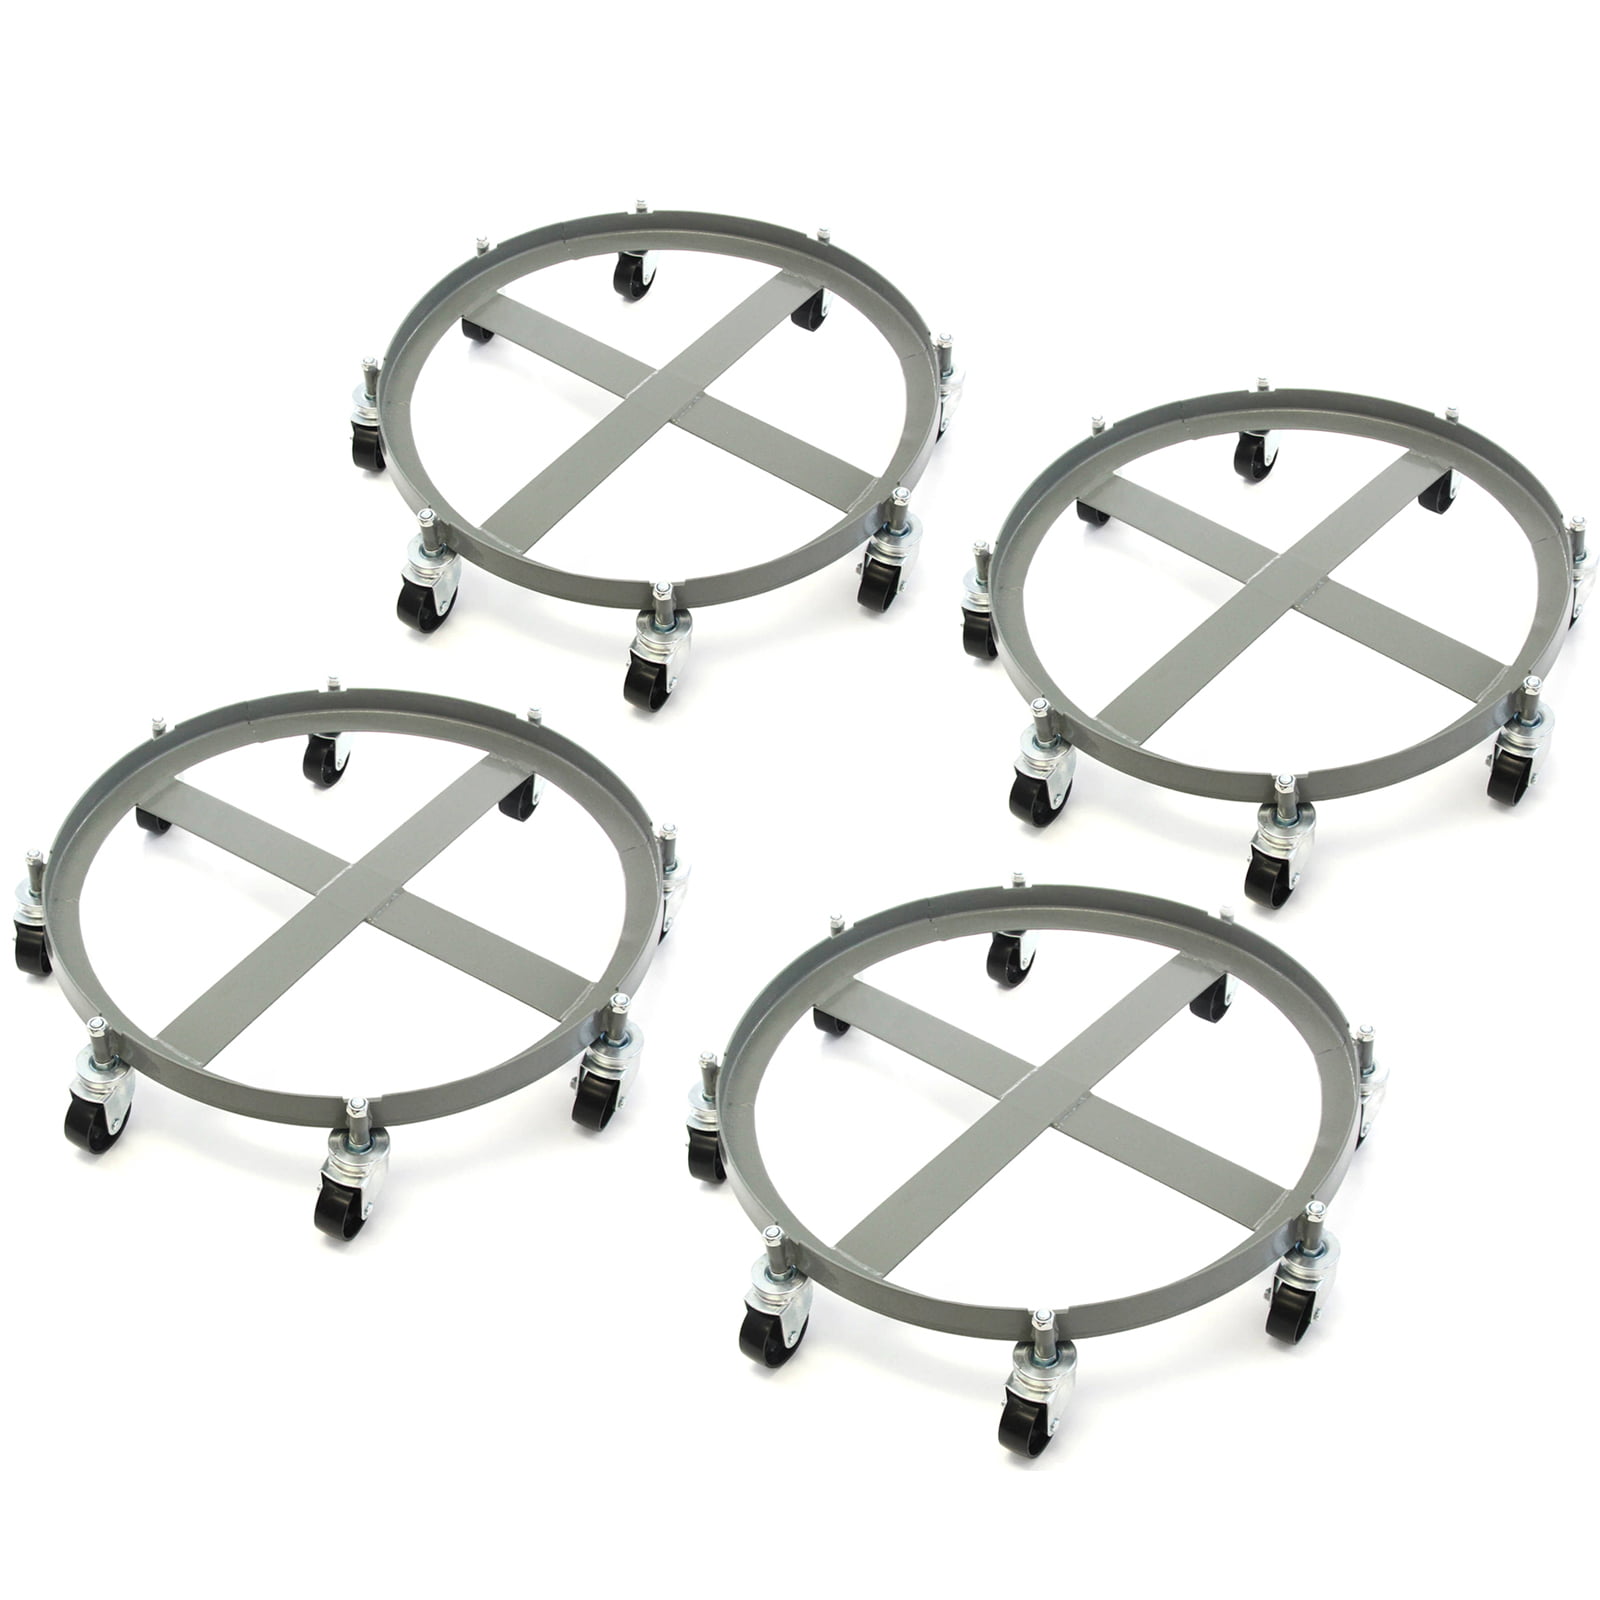 2PCS 55 Gallon Drum Dolly with 5 Swivel Casters Heavy Duty Steel 